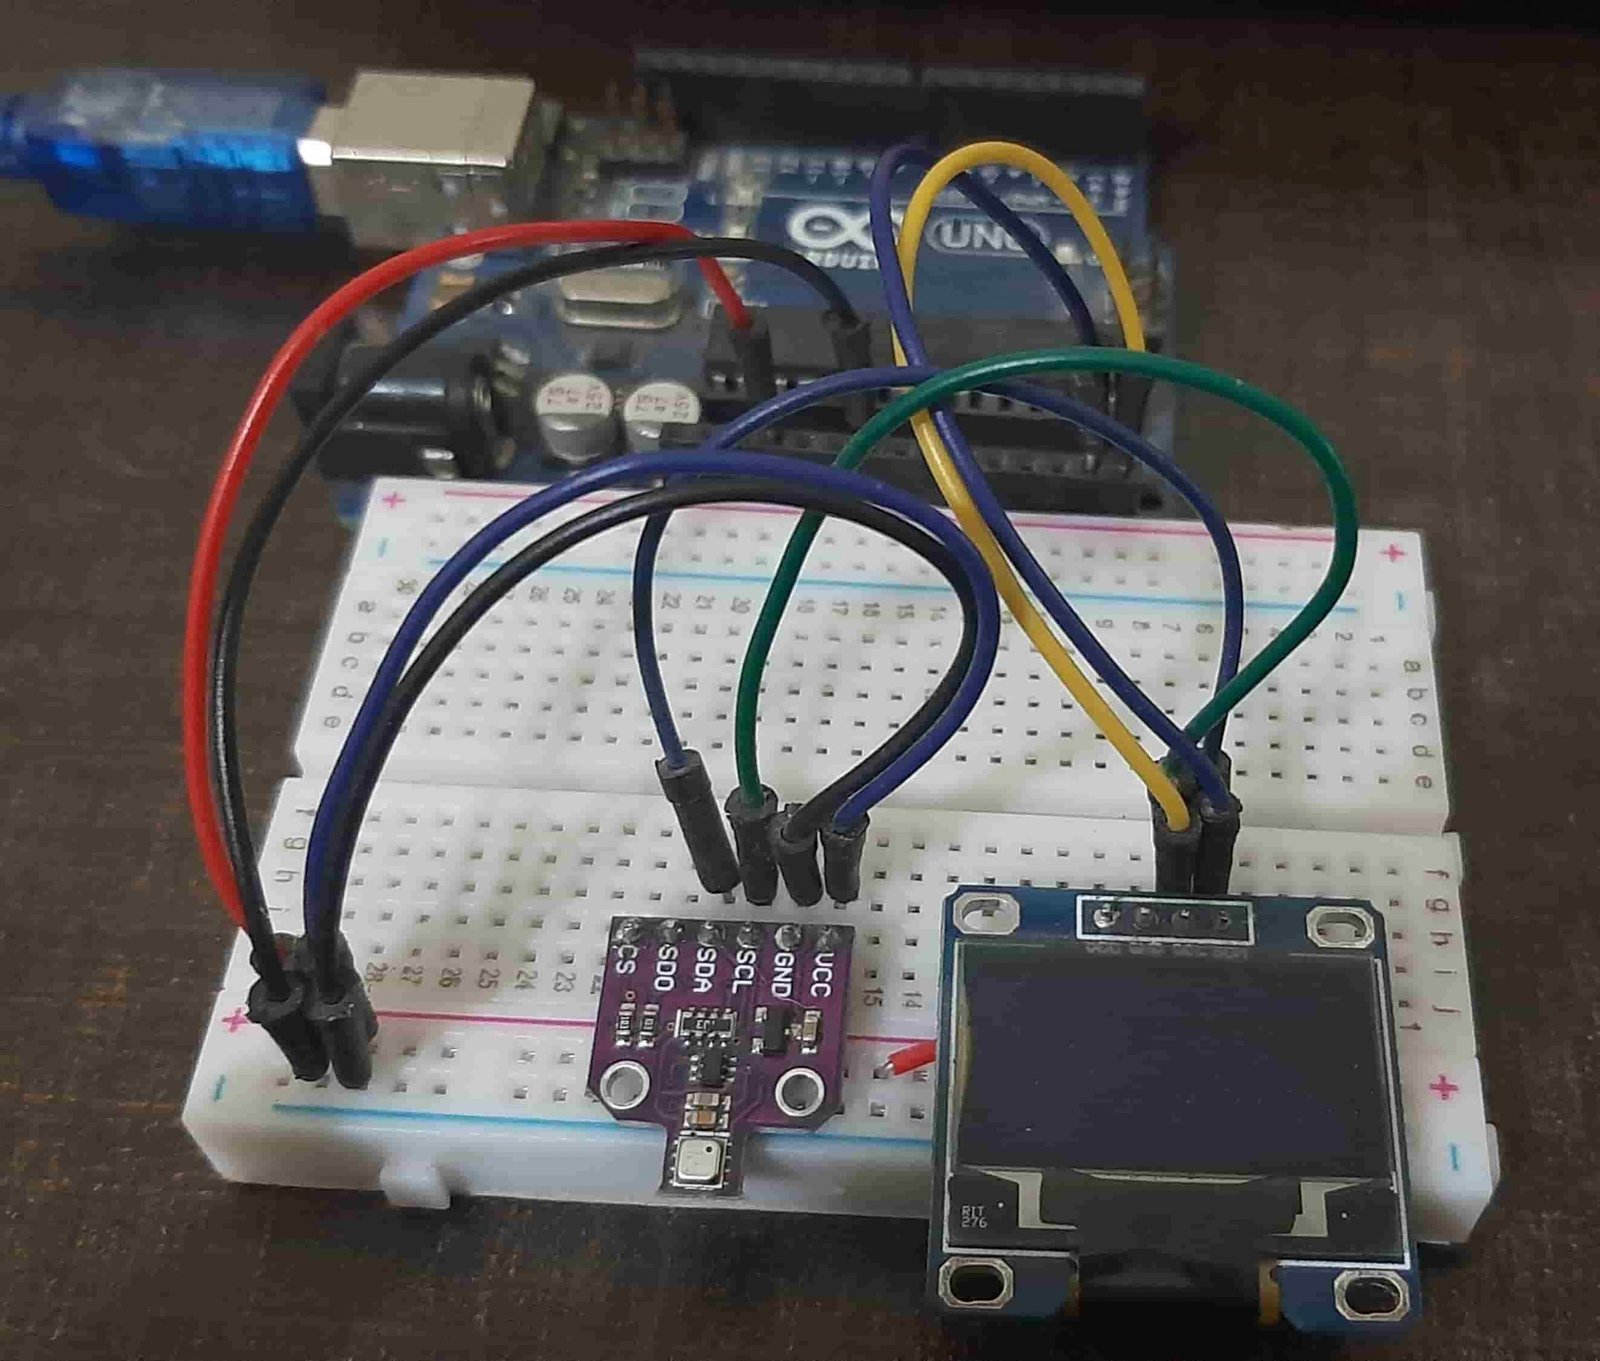 BME680 interfacing with Arduino and OLED Arduino IDE